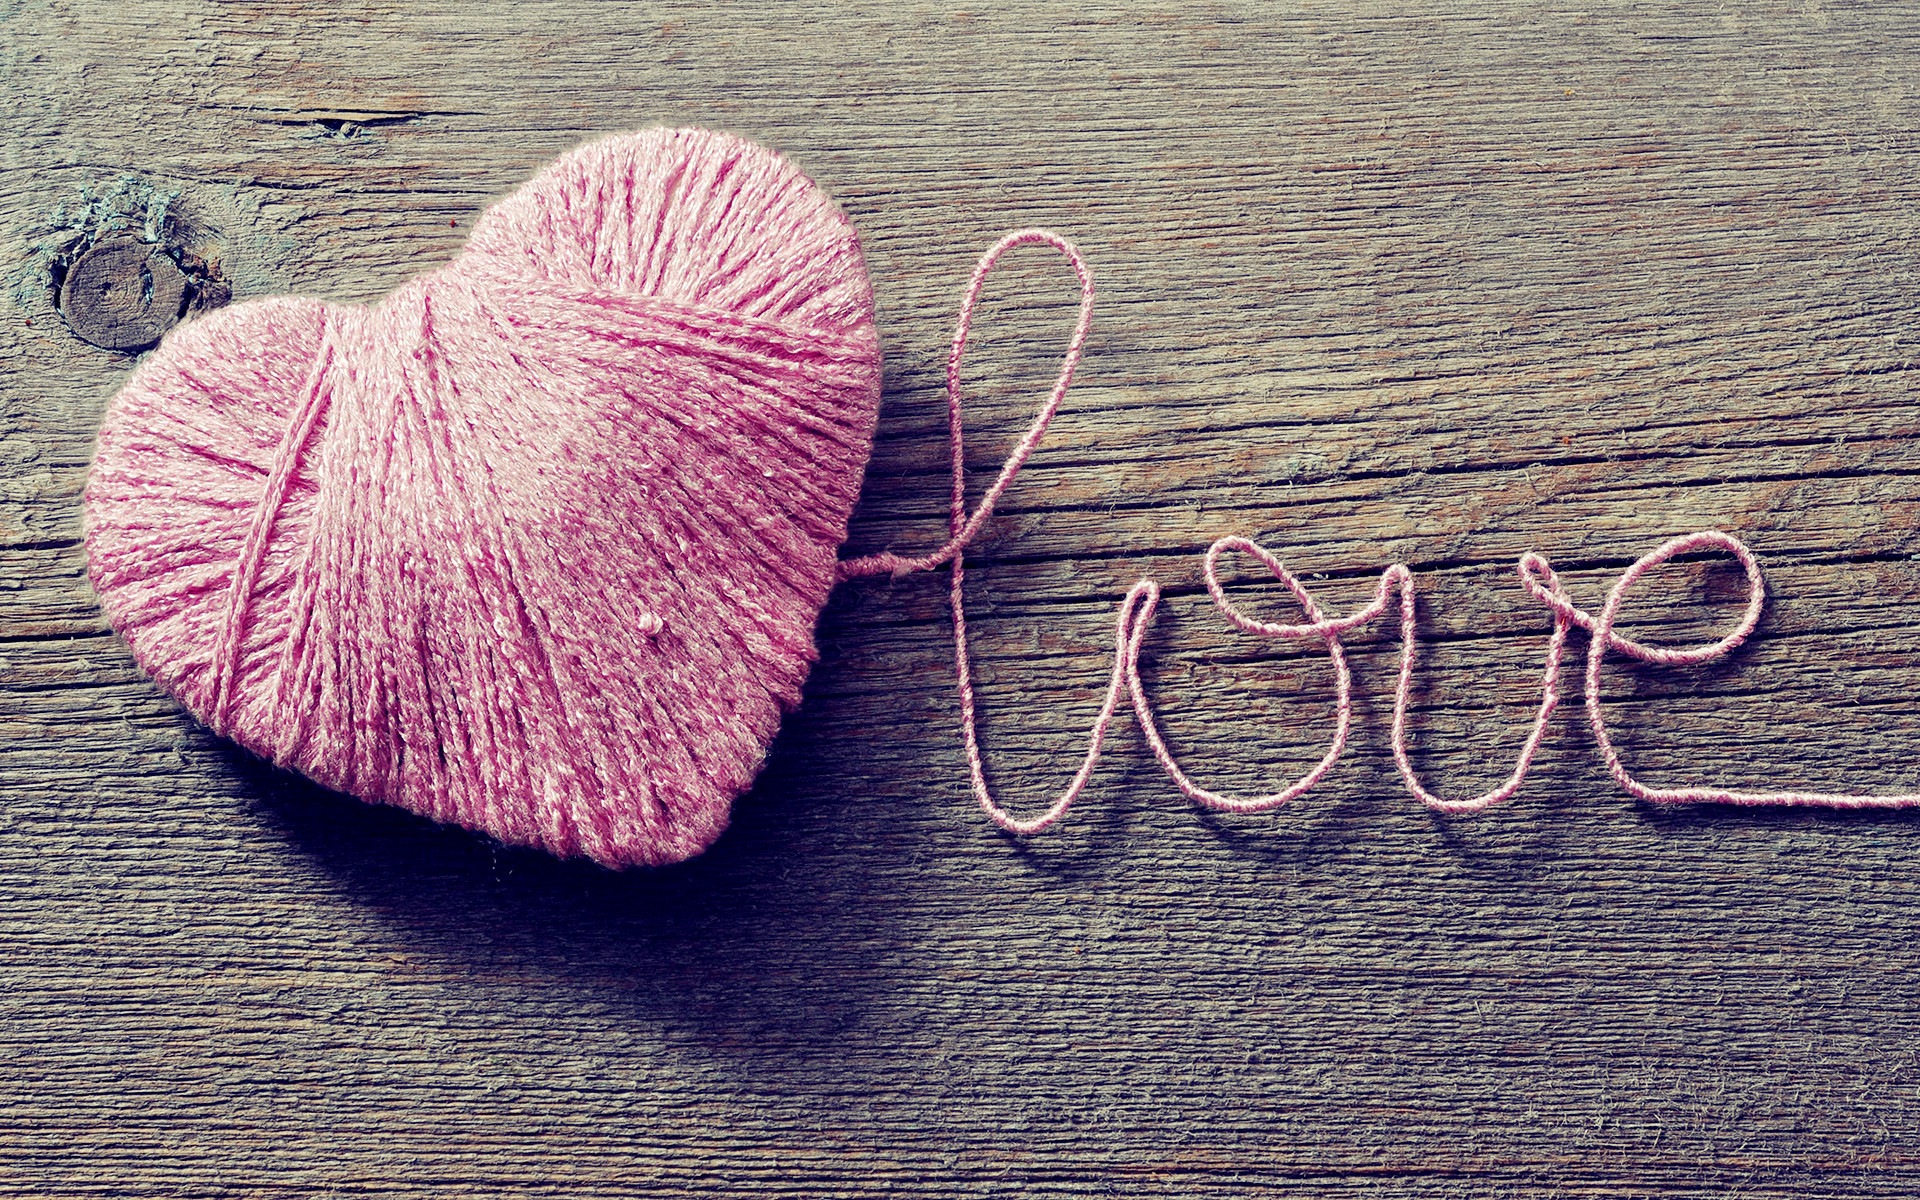 The theme of love, creative heart-shaped HD wallpapers #10 - 1920x1200